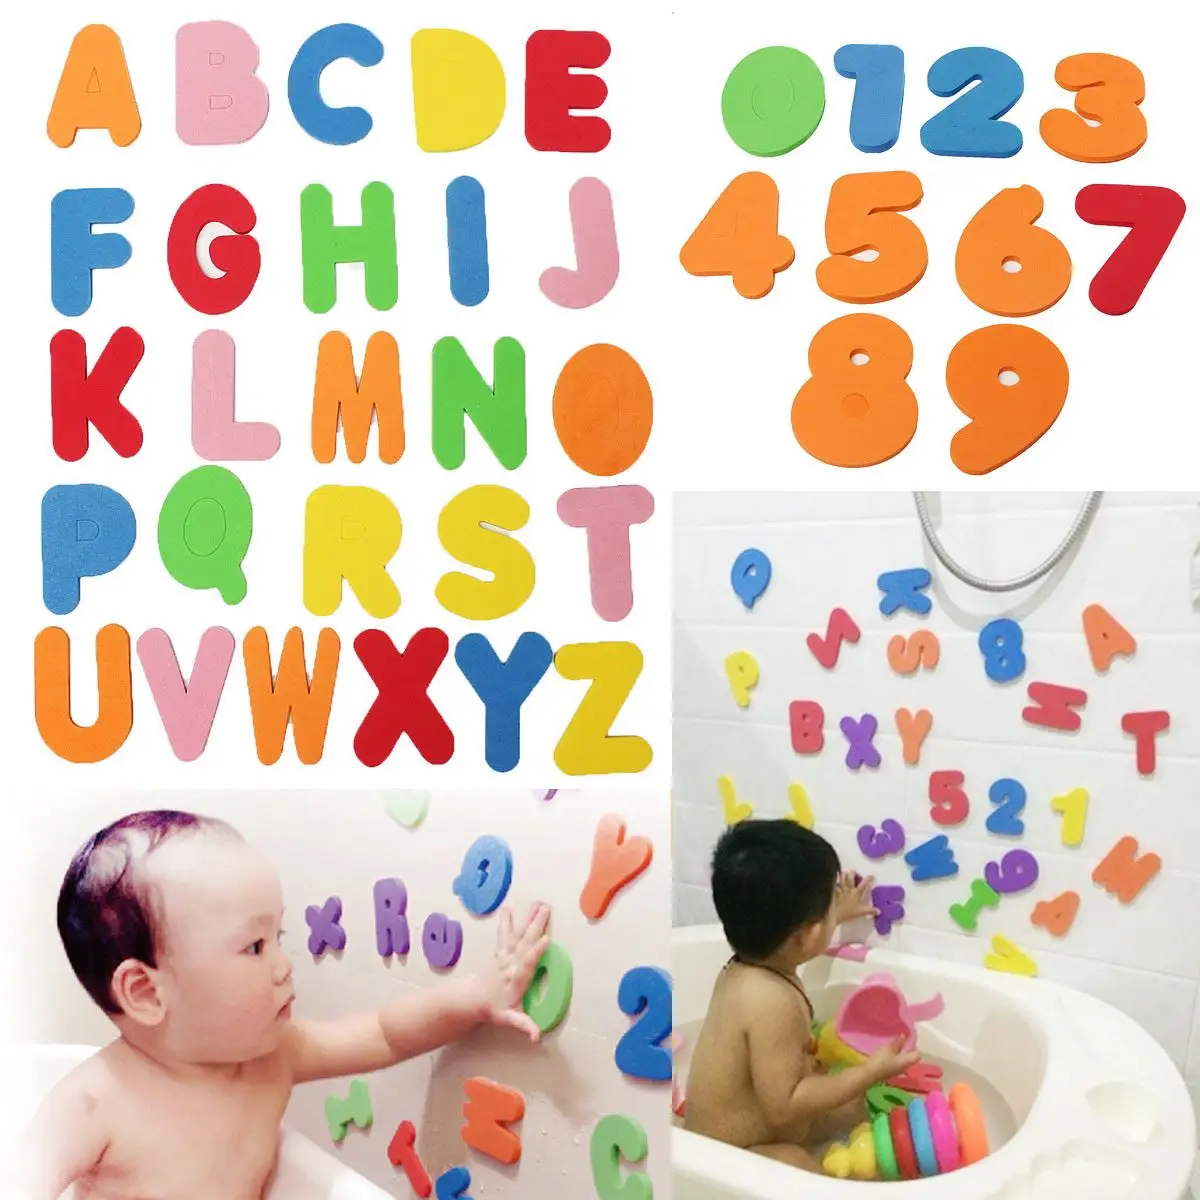 36PCS Alphanumeric Letters/33pcs Russian alphabet Bath Puzzle Soft EVA Numbers Kids Baby Toy Early Educational Toy Tool Bath Toy